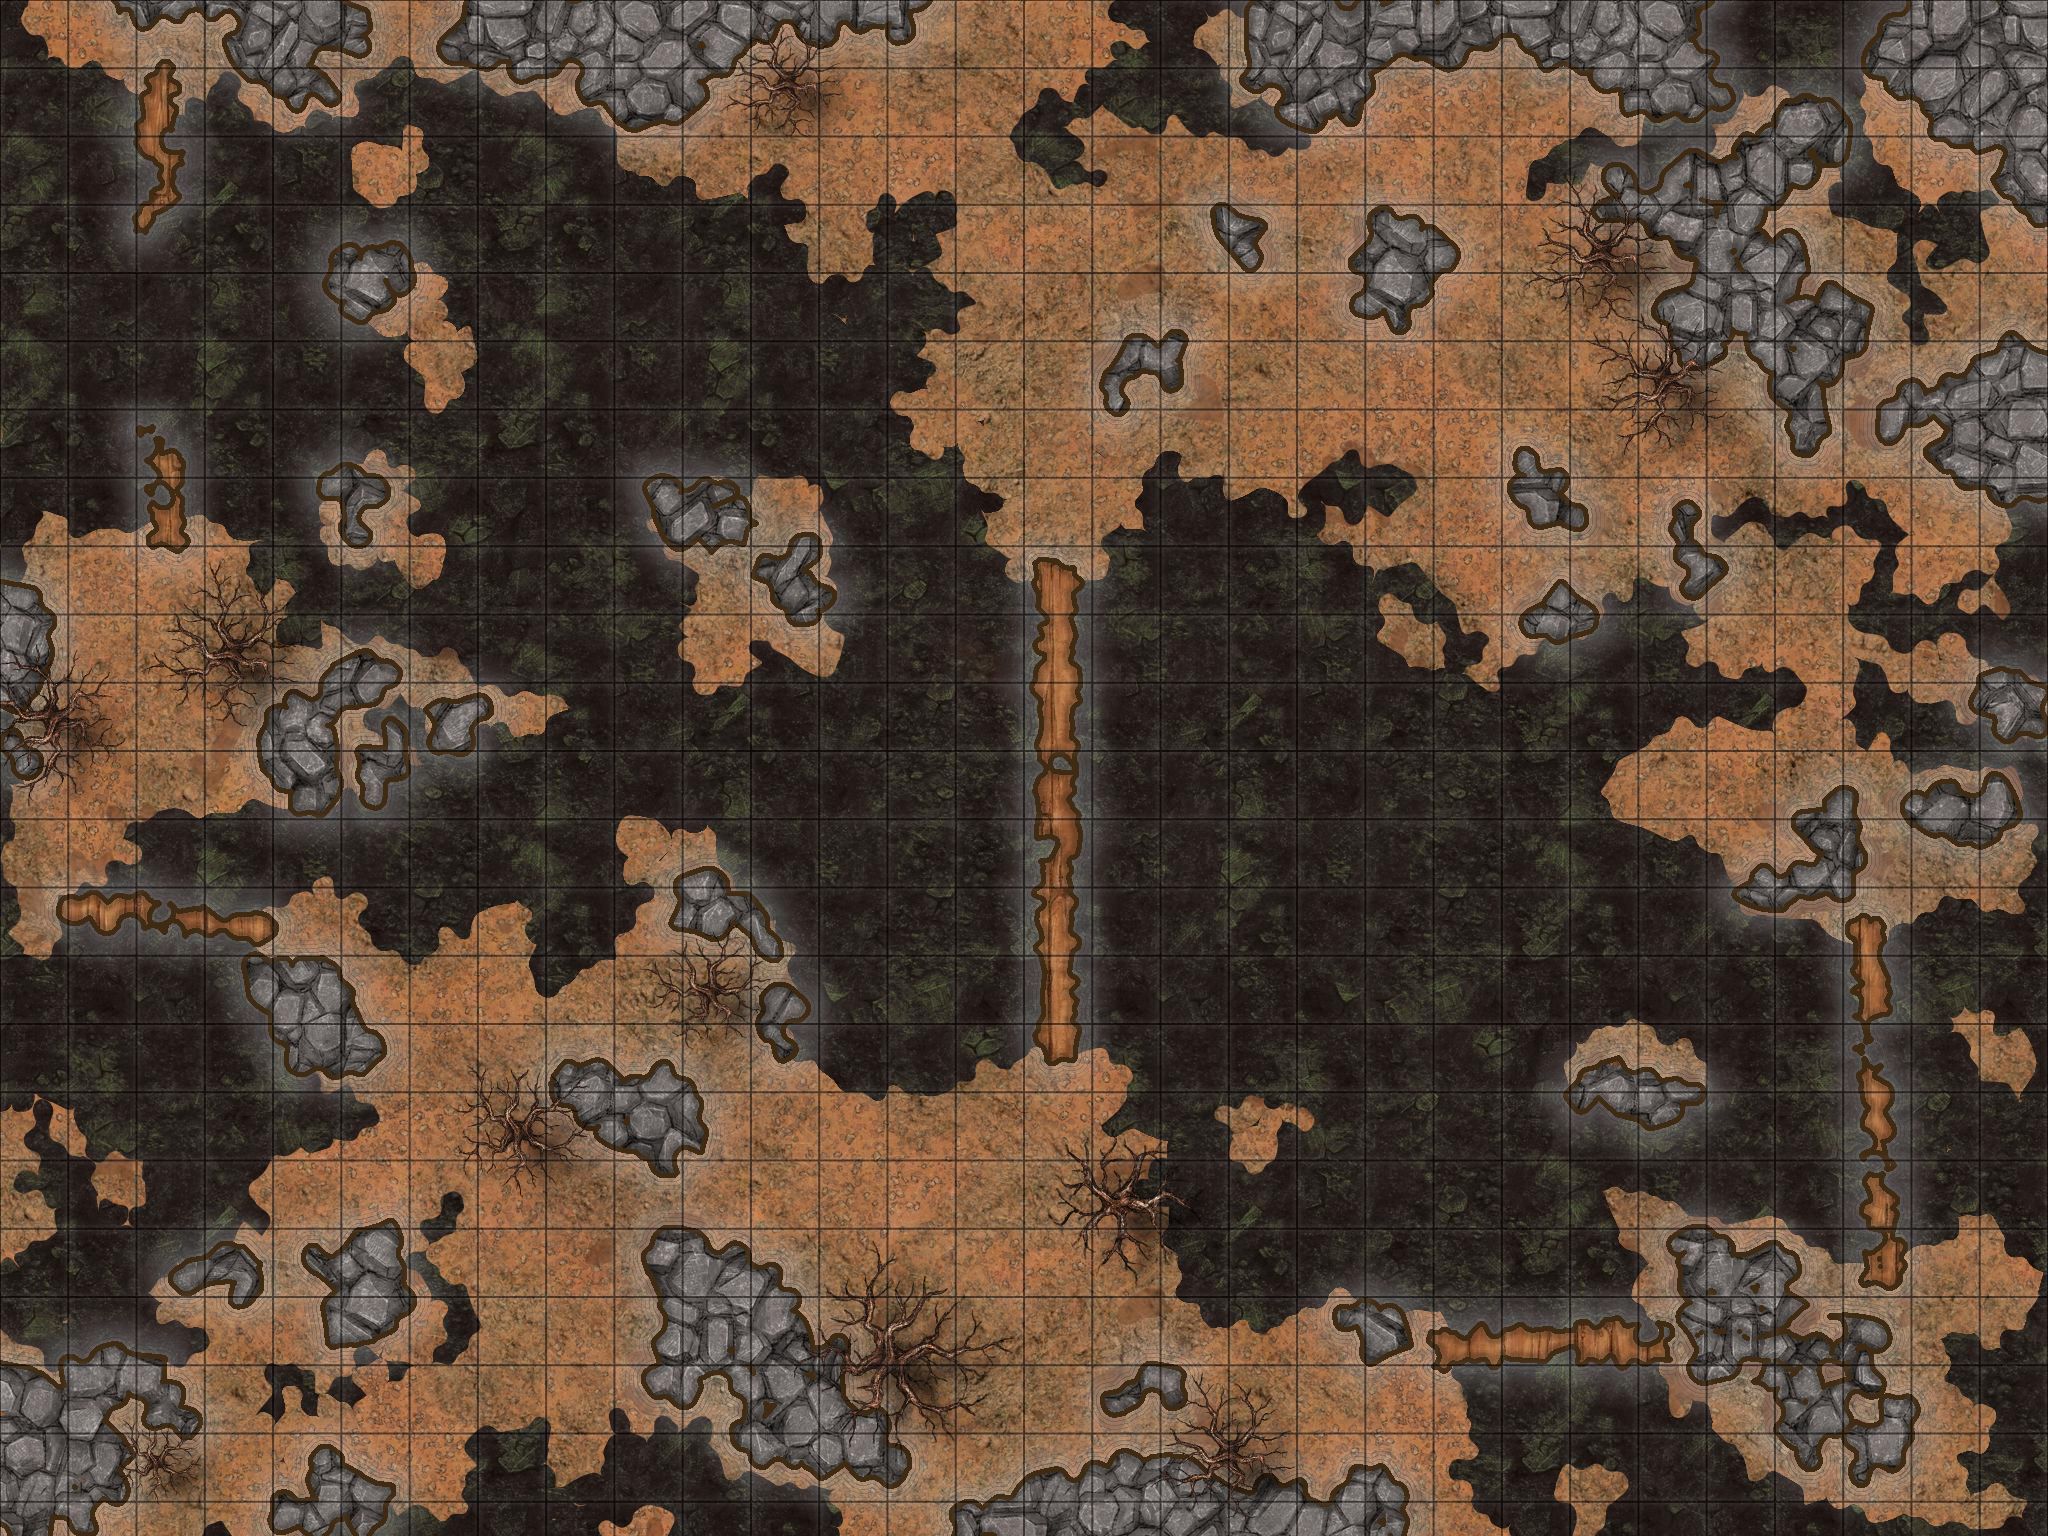 A map. The ground is a dull brown, with grey stones littered about. A dark chasm cuts diagonally across the center of the map, with a series of rickety wooden bridges crossing it vertically.